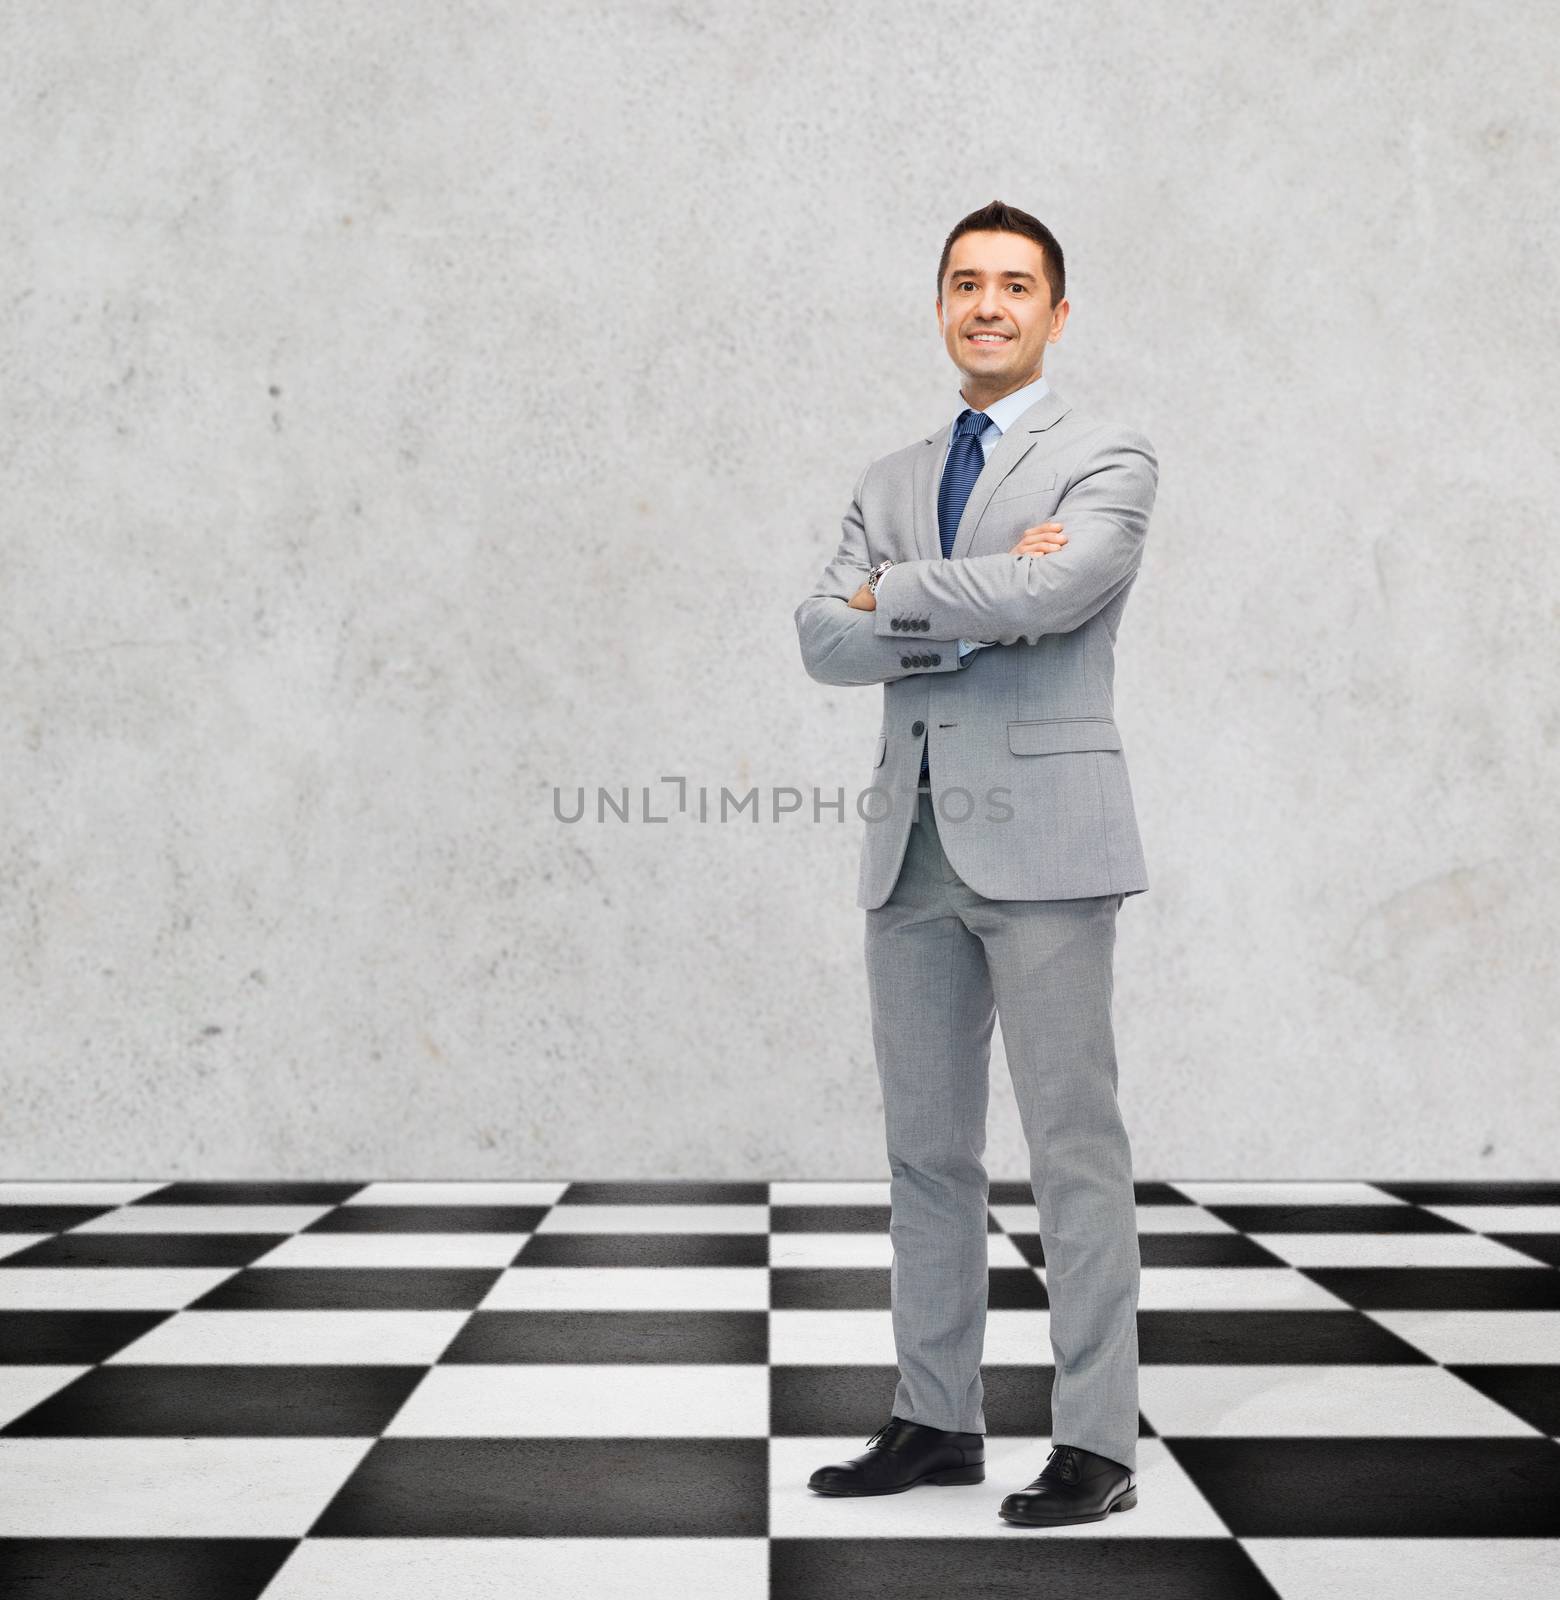 business, people and strategy concept - happy smiling businessman in suit standing on checkerboard pattern floor over gray background